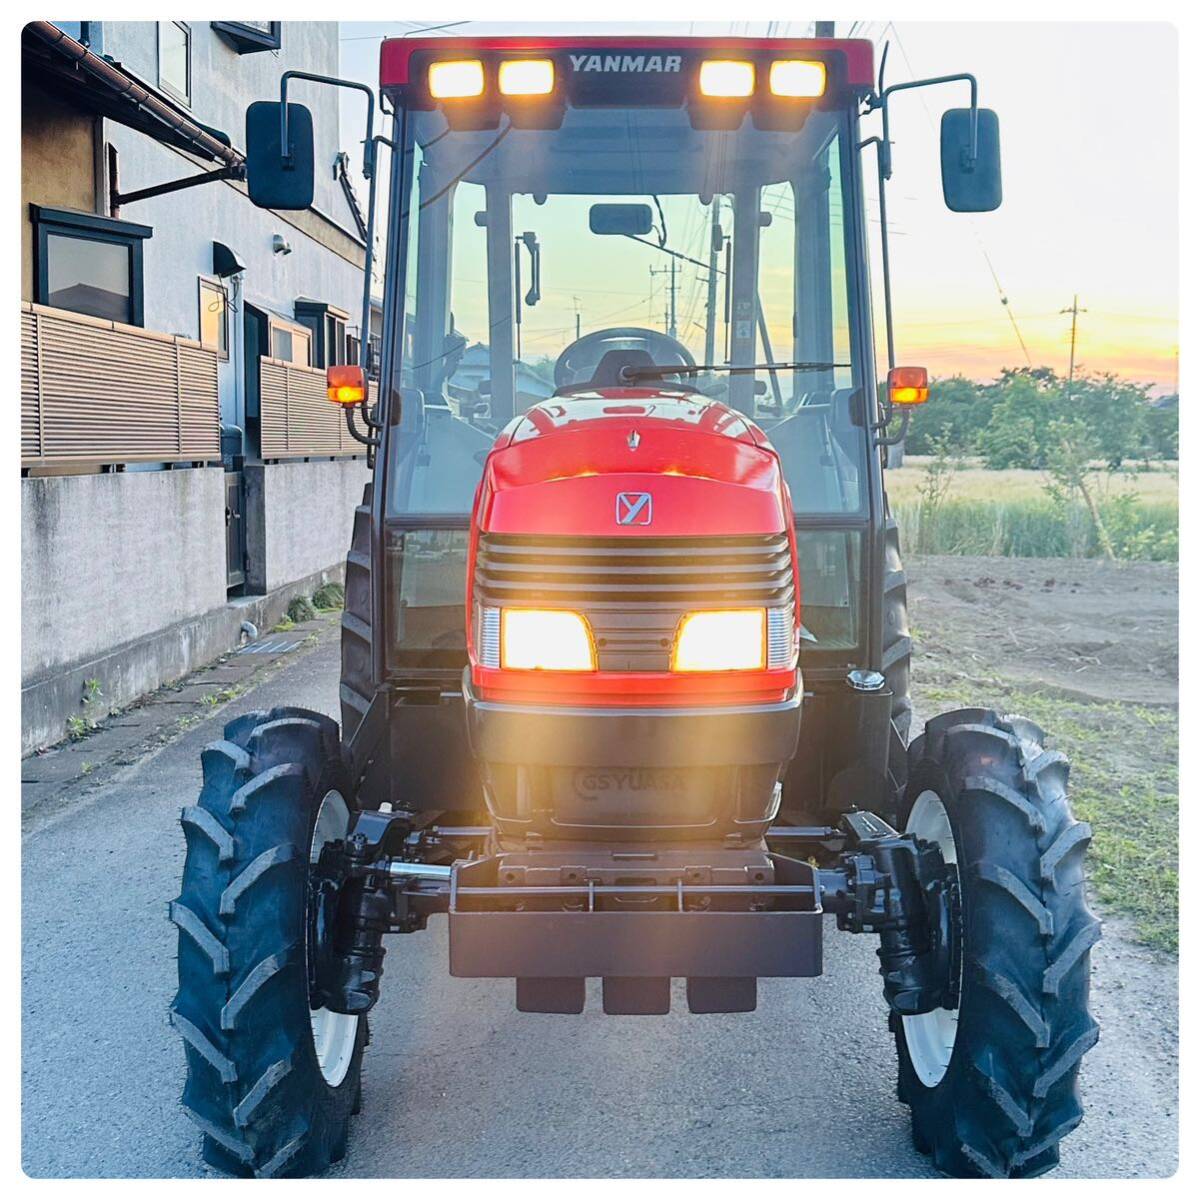 ** Yanmar tractor ** AF660** period of use 830h **60 horse power **4WD** external oil pressure taking . exit **kobasi rotary attaching **